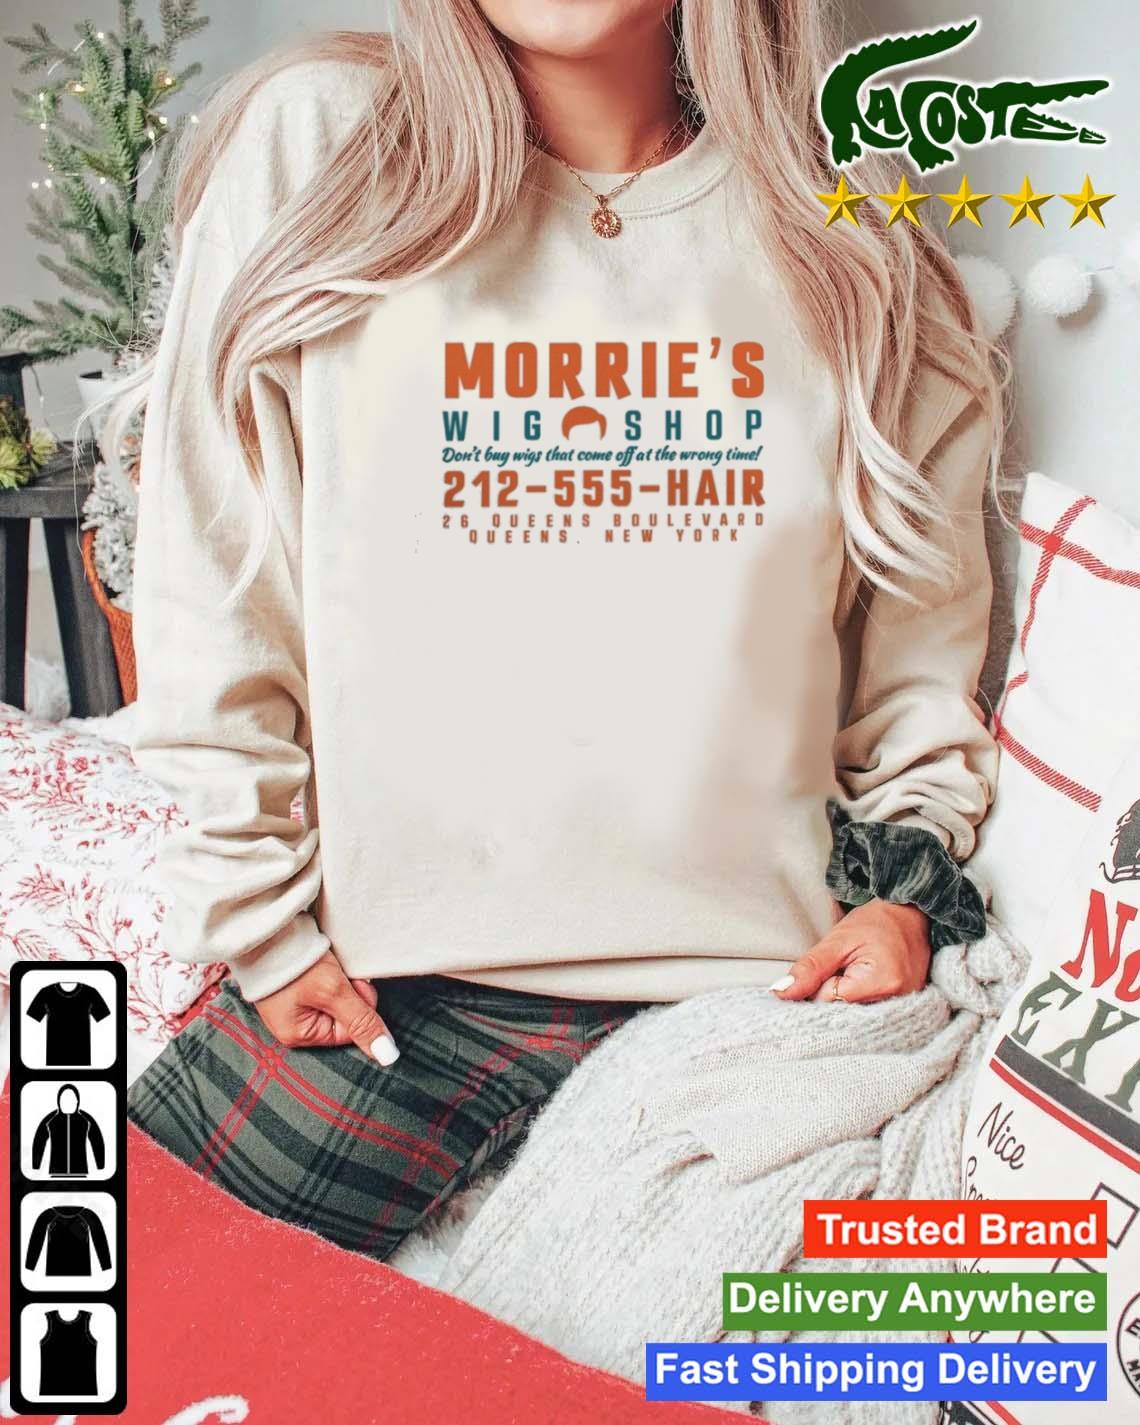 Morrie's Wig Shop Don't Buy Wigs That Come Off At The Wrong Time T-s Mockup Sweater